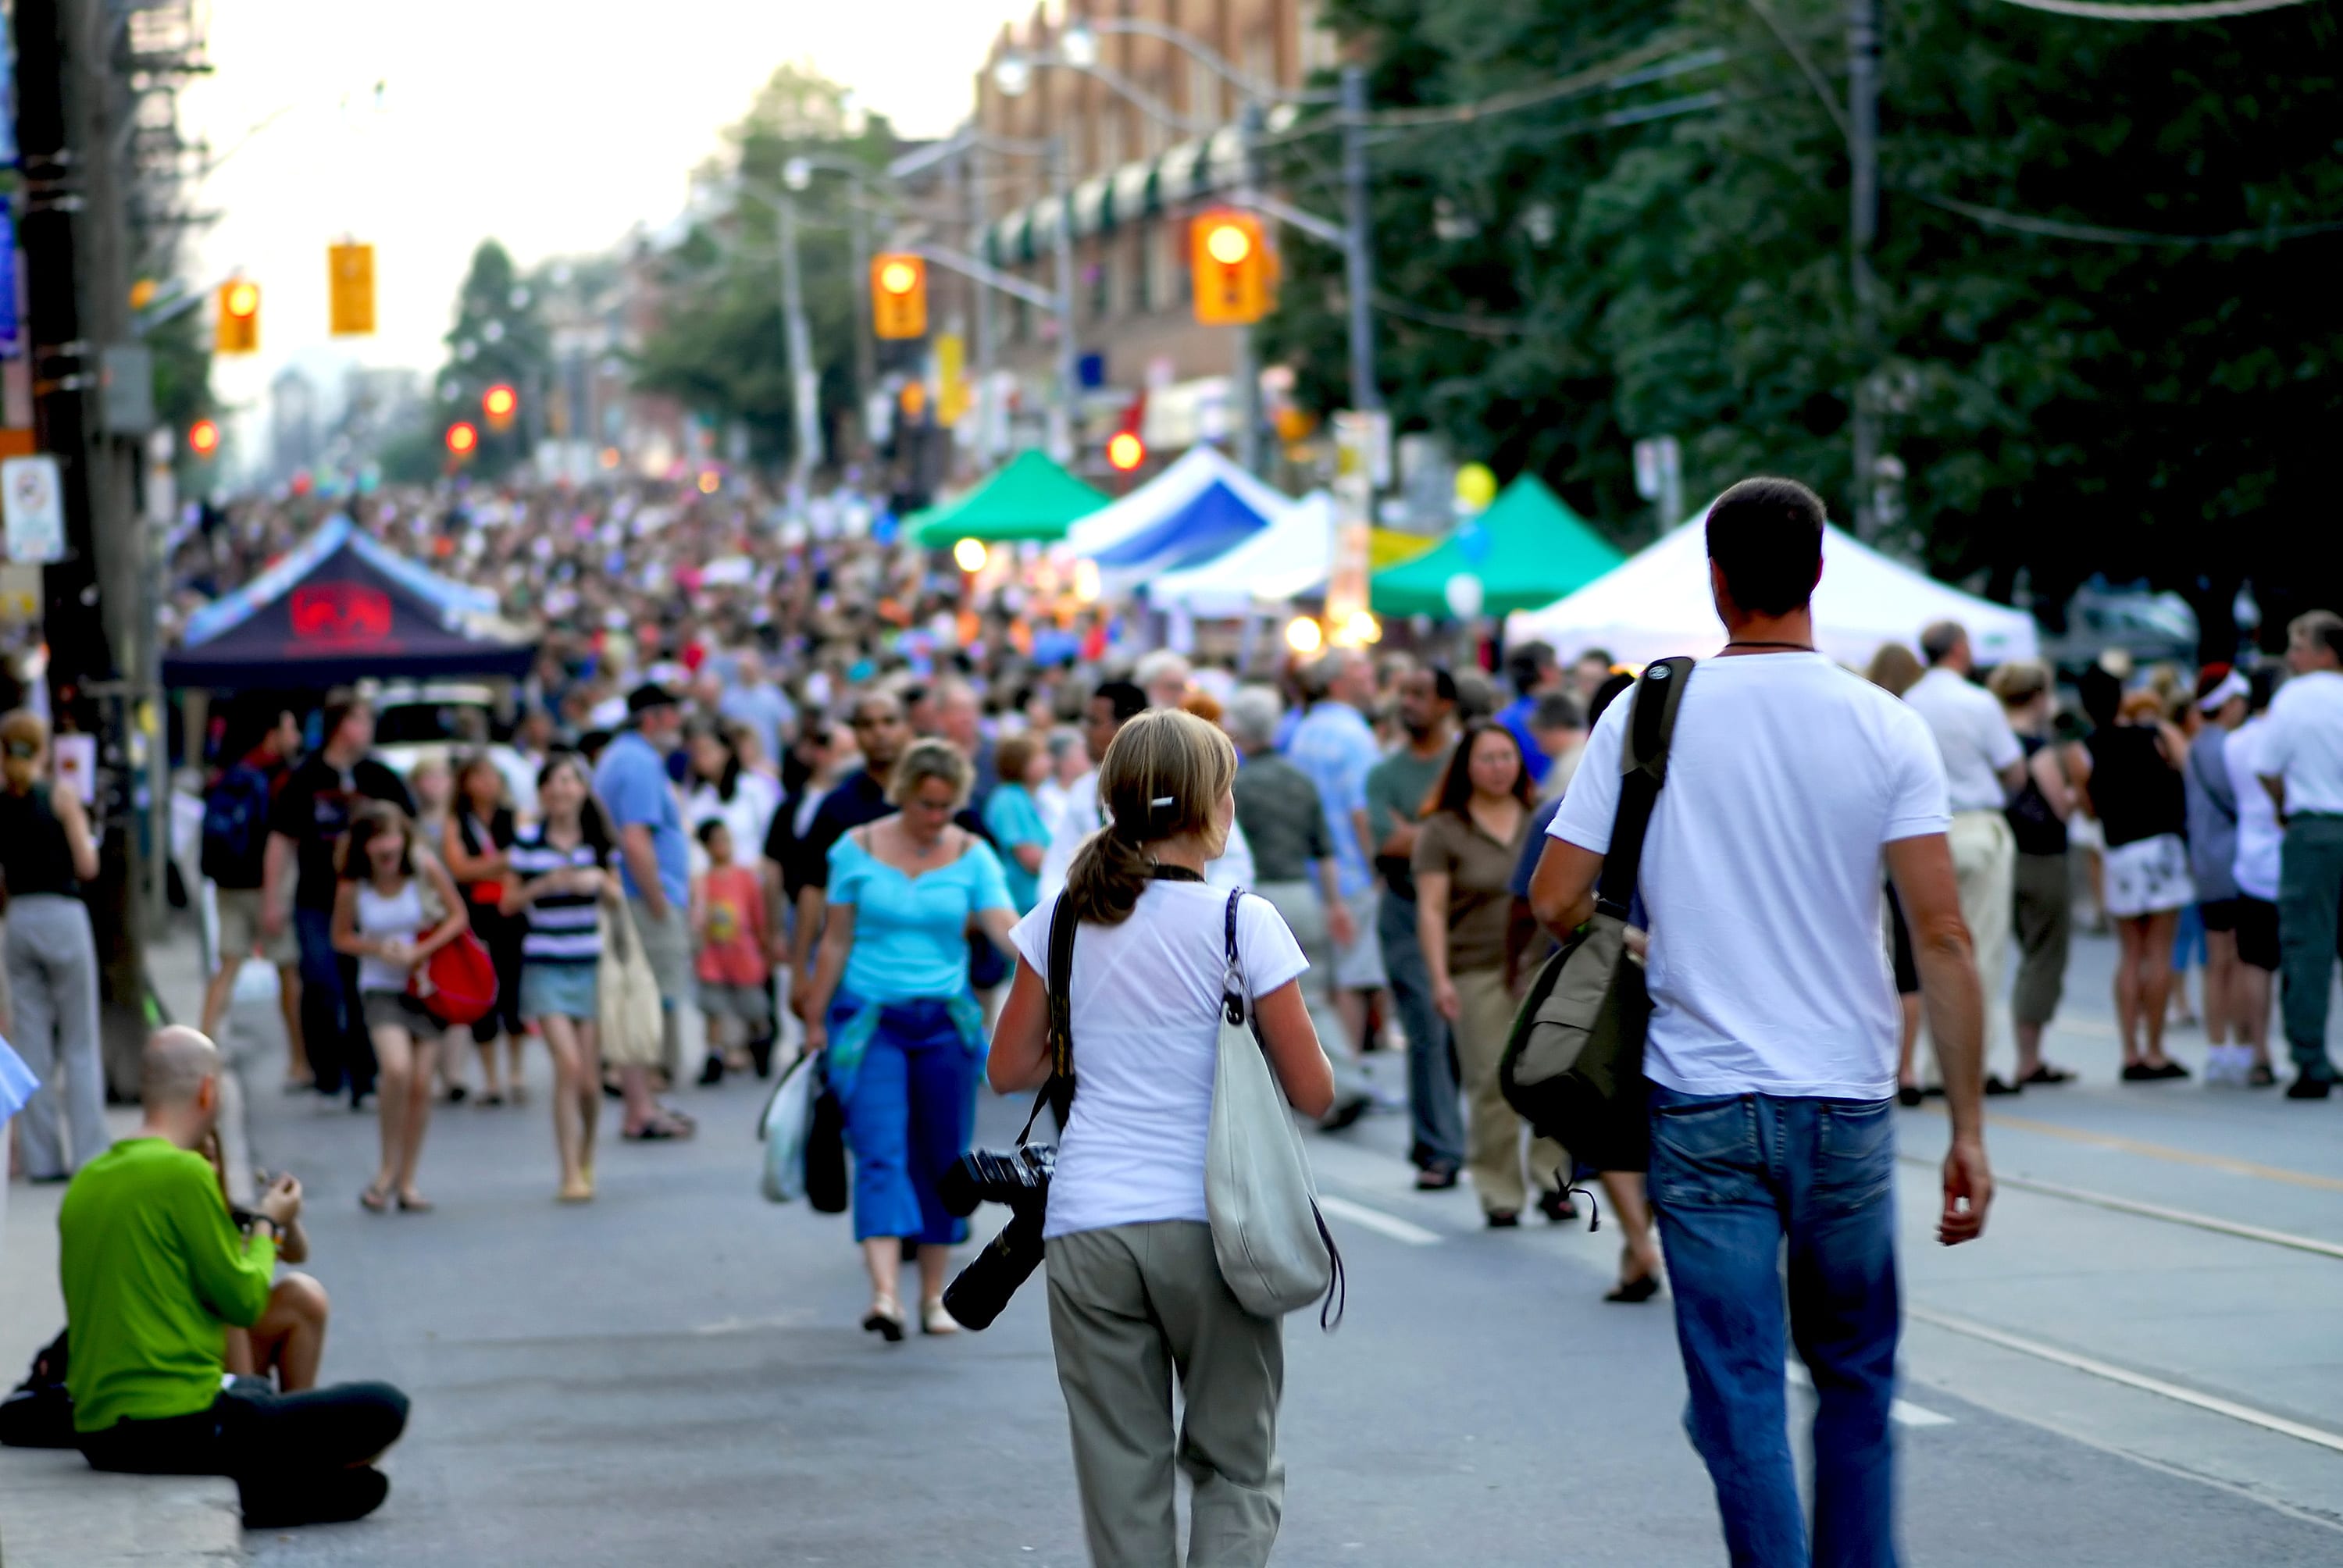 Street in Toronto closed for an outdoor street festival with crowds and tents.